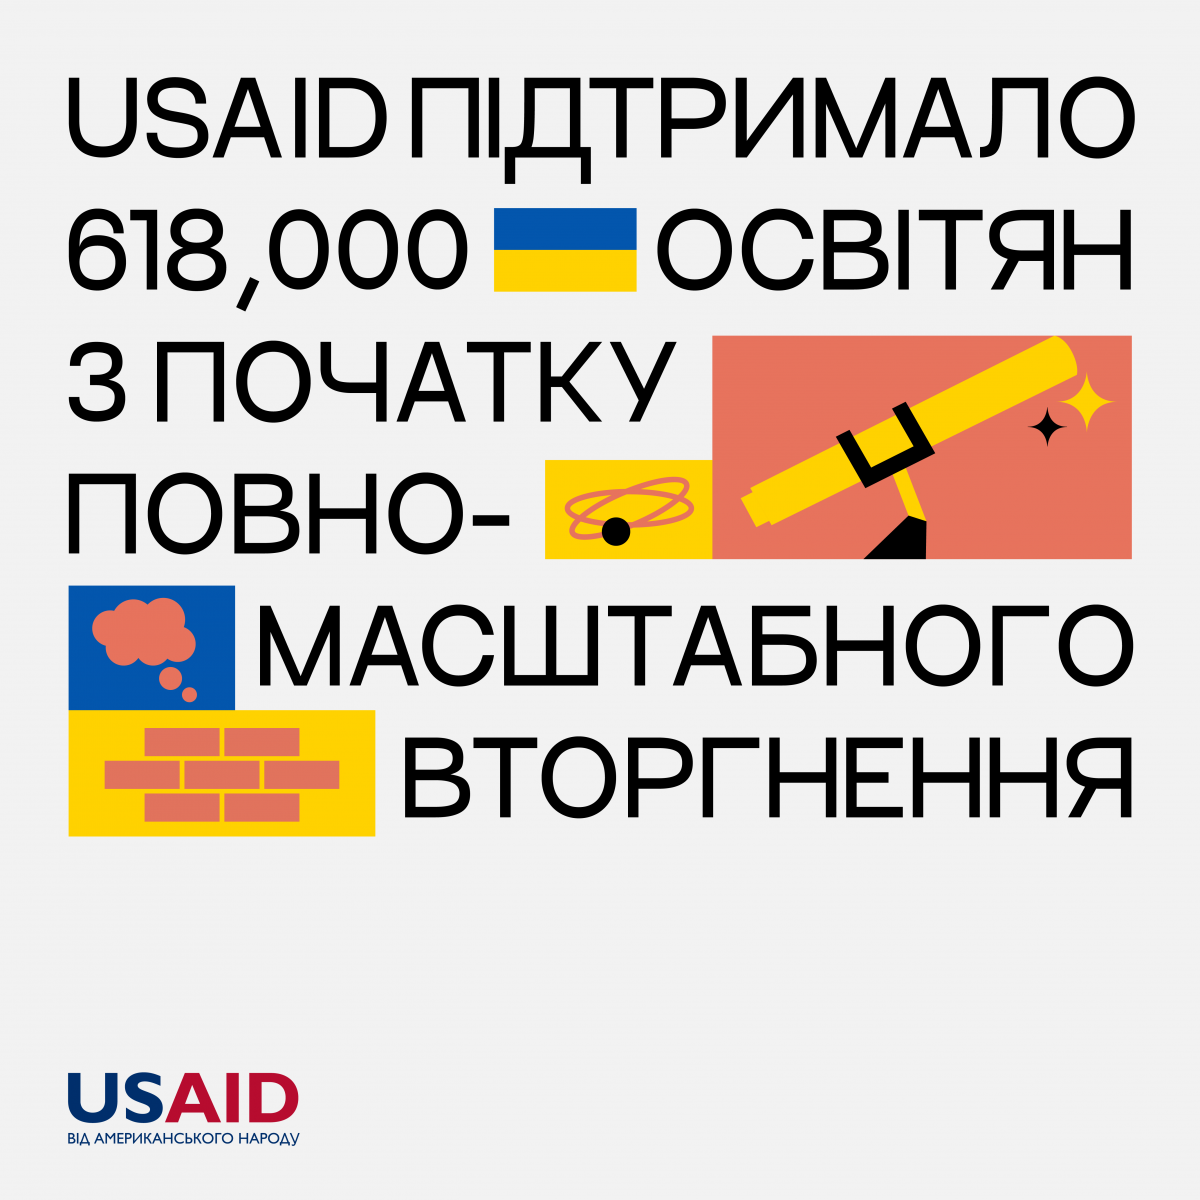 A poster on USAID direct budget support to Ukraine